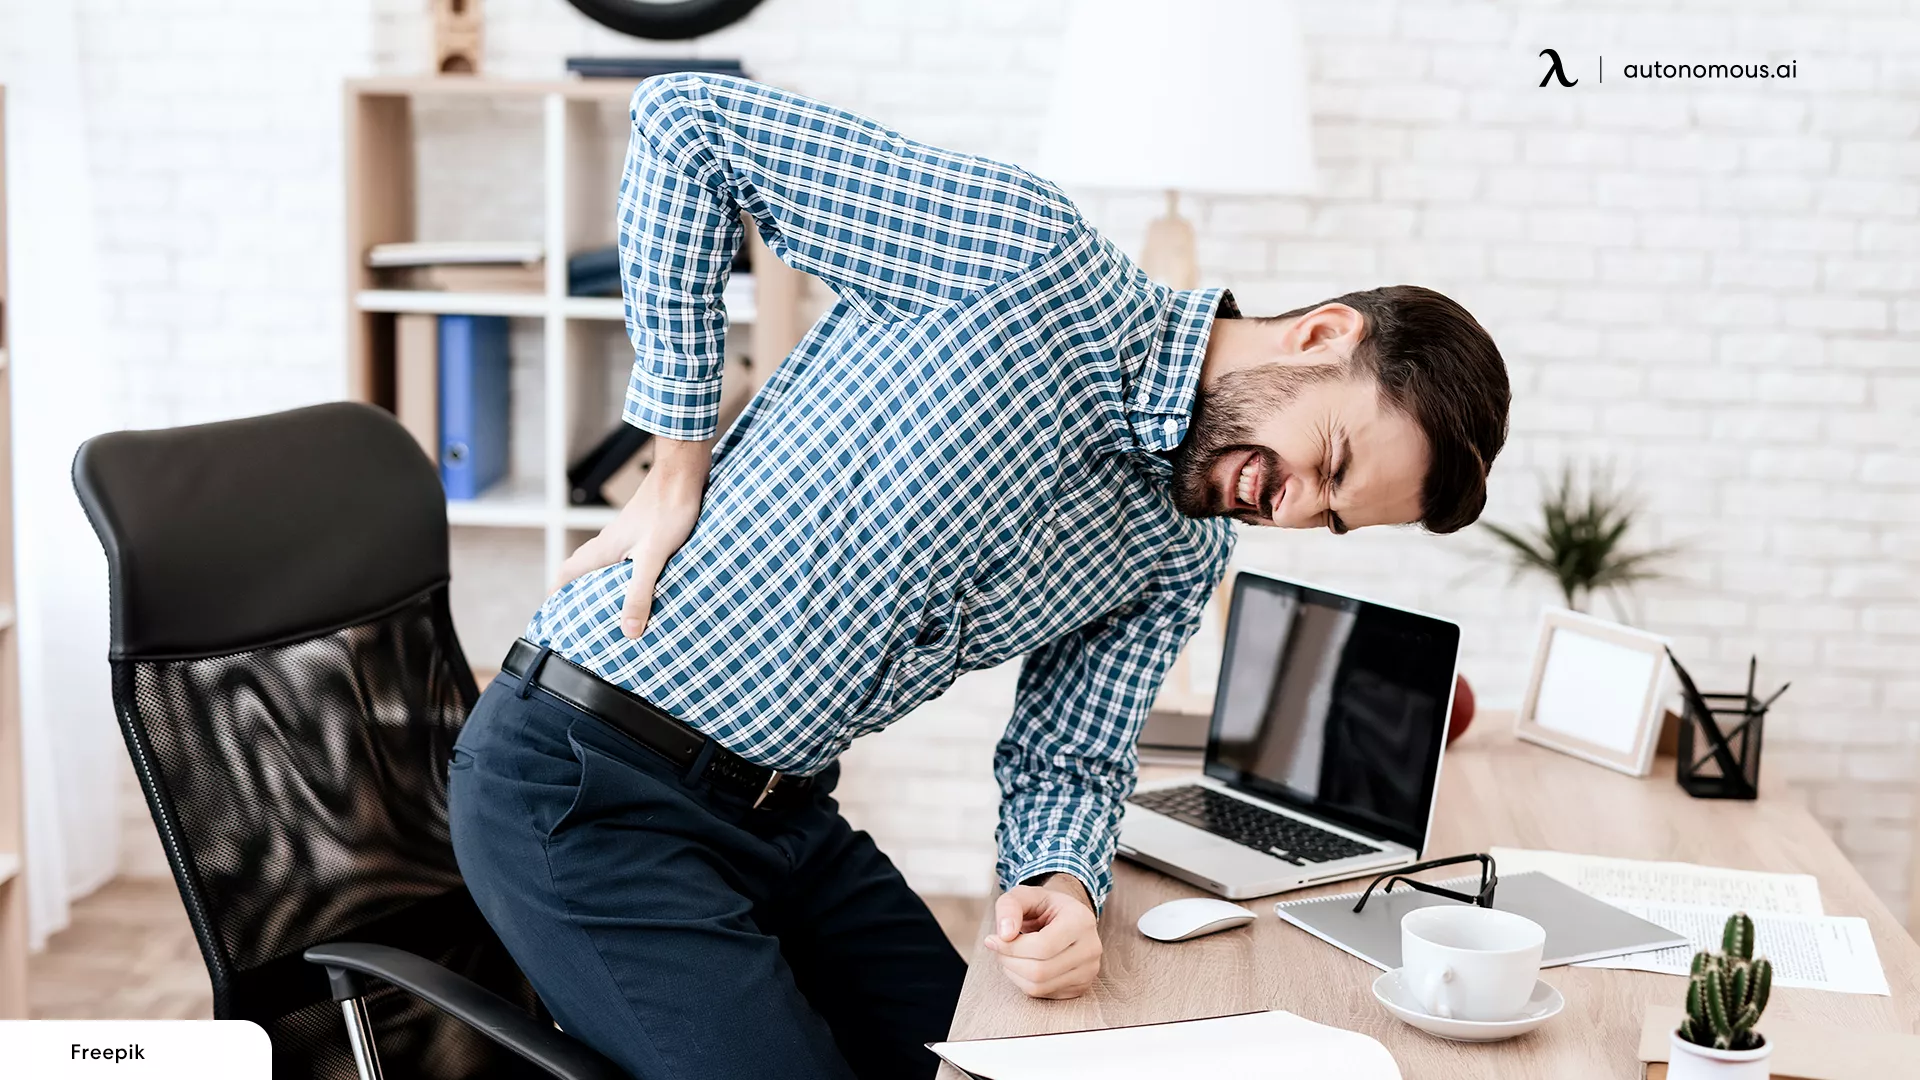 How does back pain affect your ability to work?